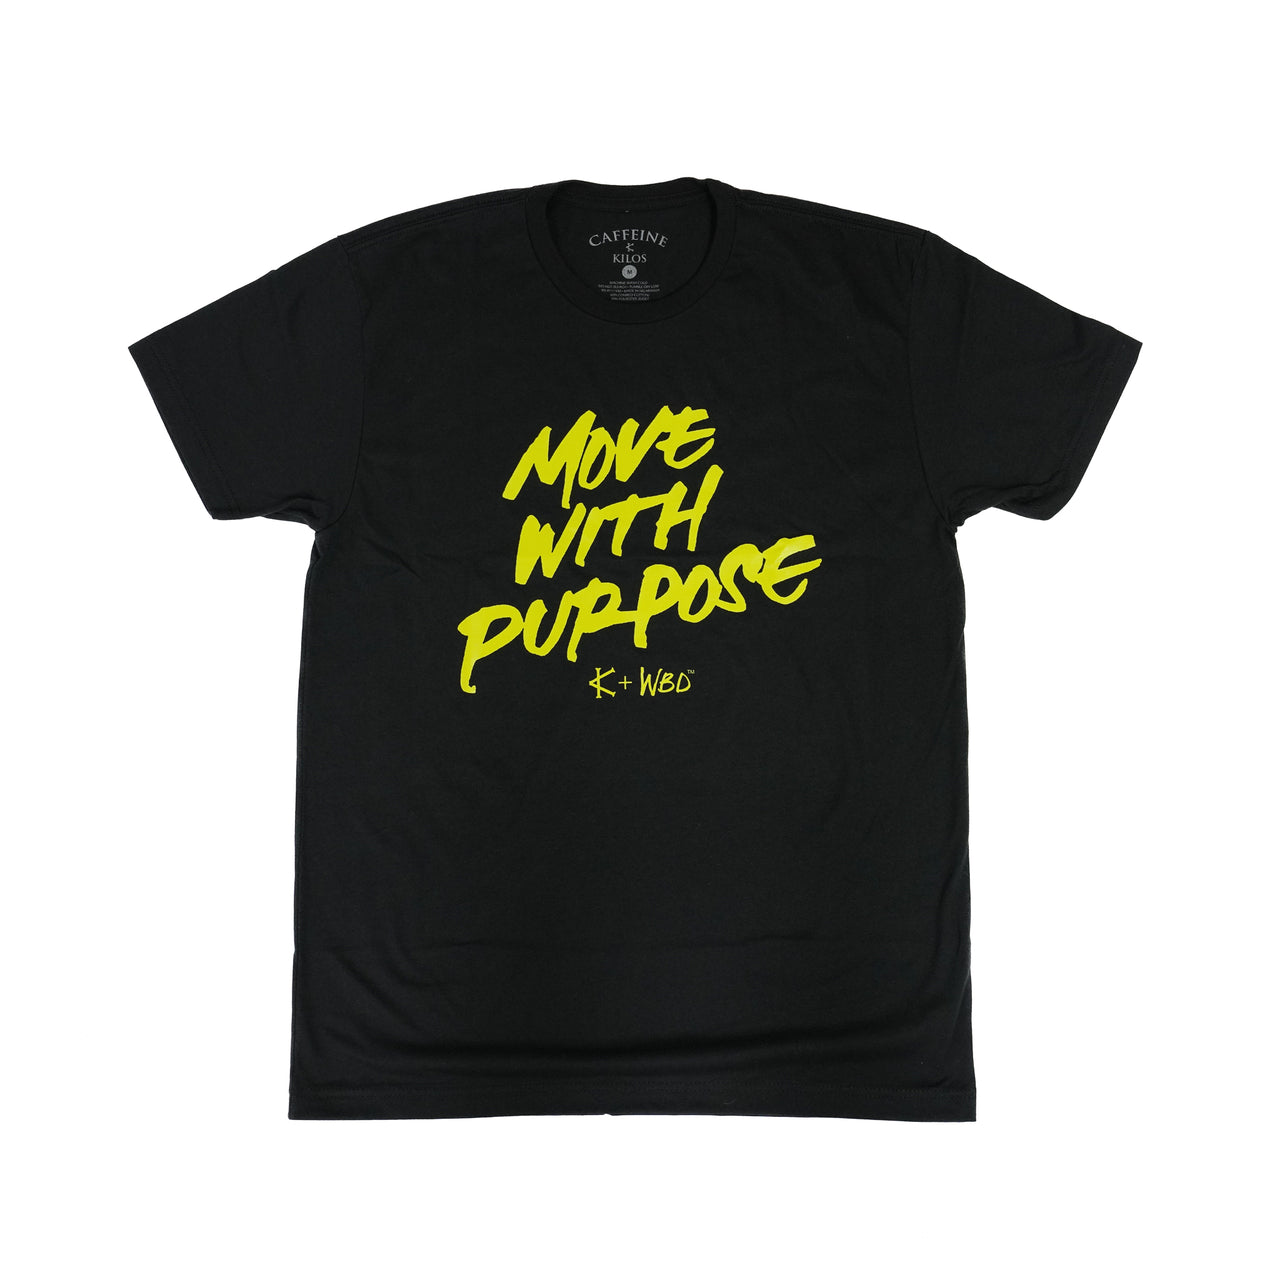 Move With Purpose Tee CK x WBD